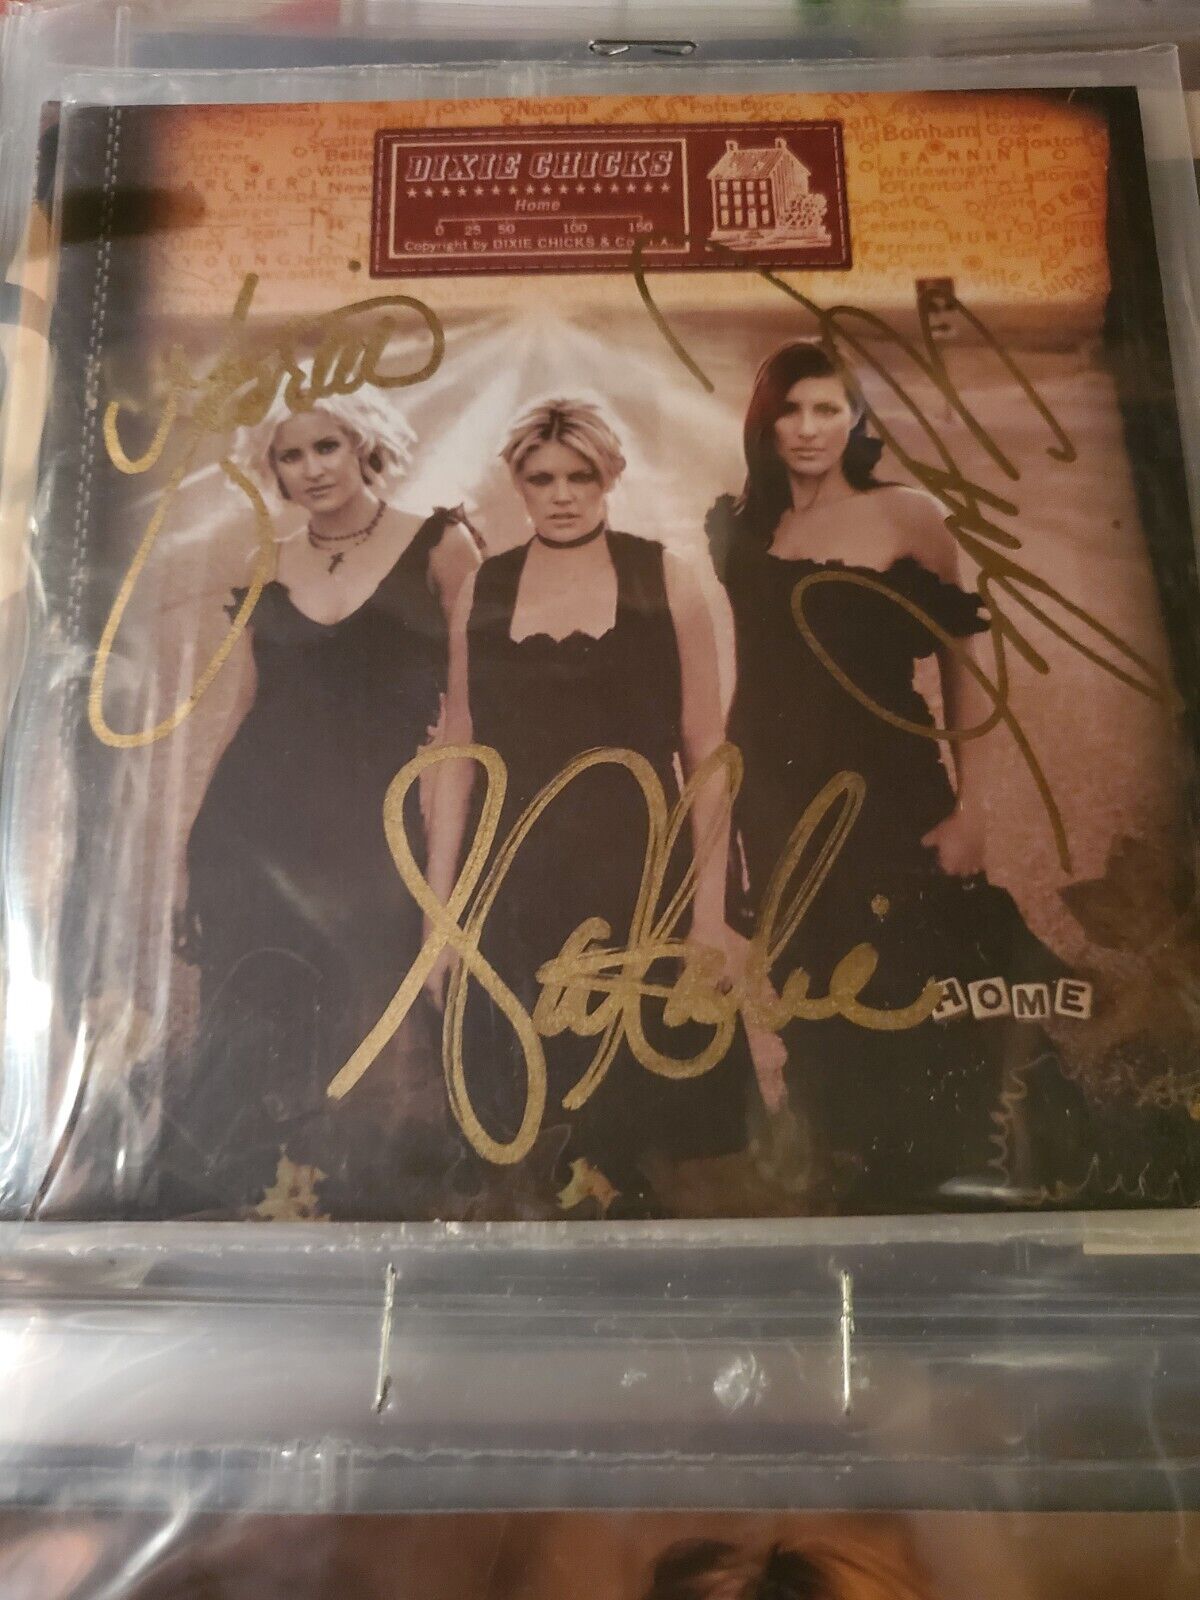 Home by The Chicks ( album cover  ) all 3 autographed  ( not certified  ) no cd